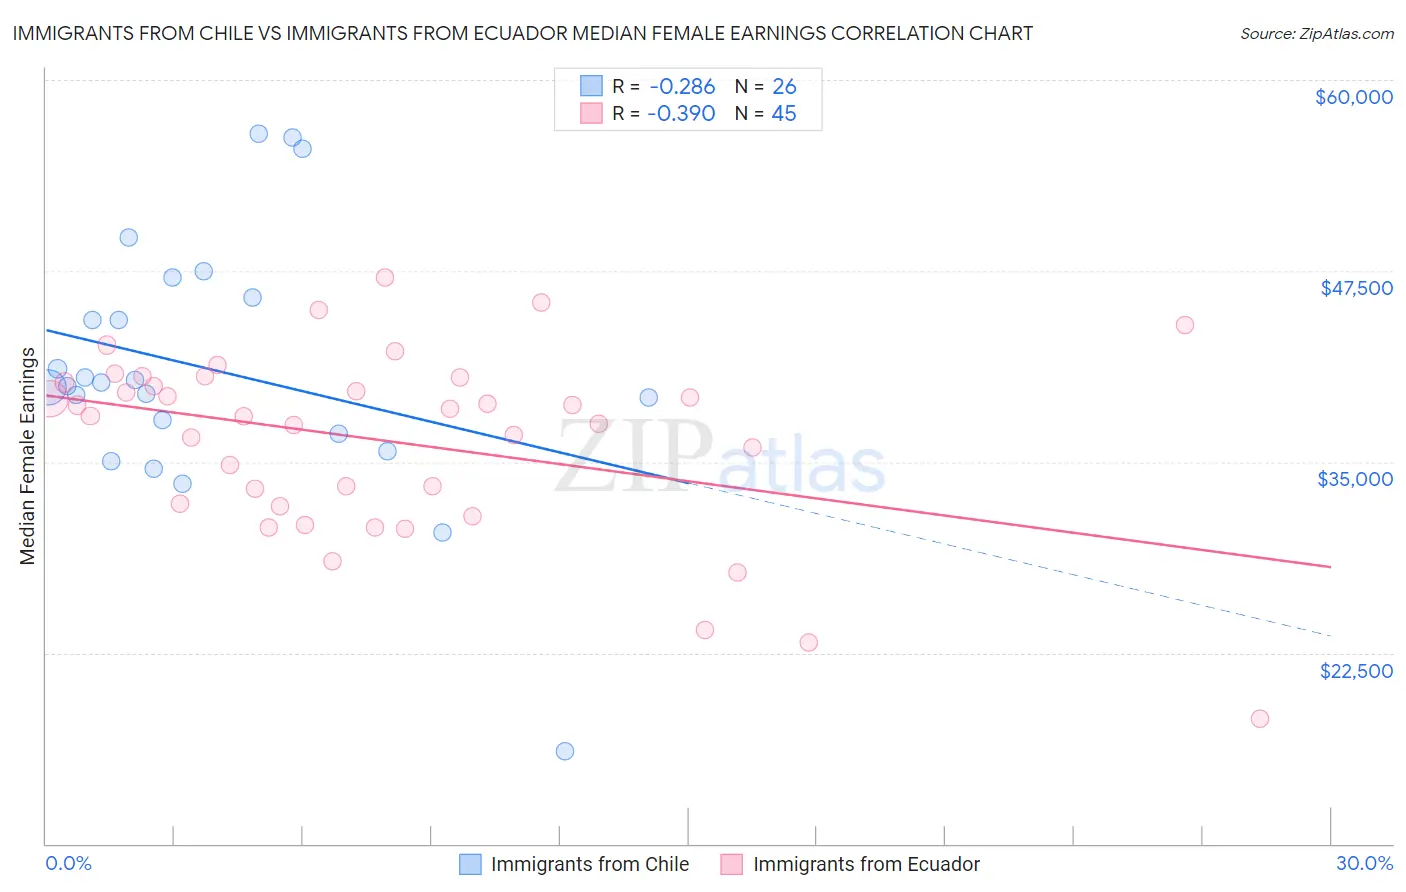 Immigrants from Chile vs Immigrants from Ecuador Median Female Earnings